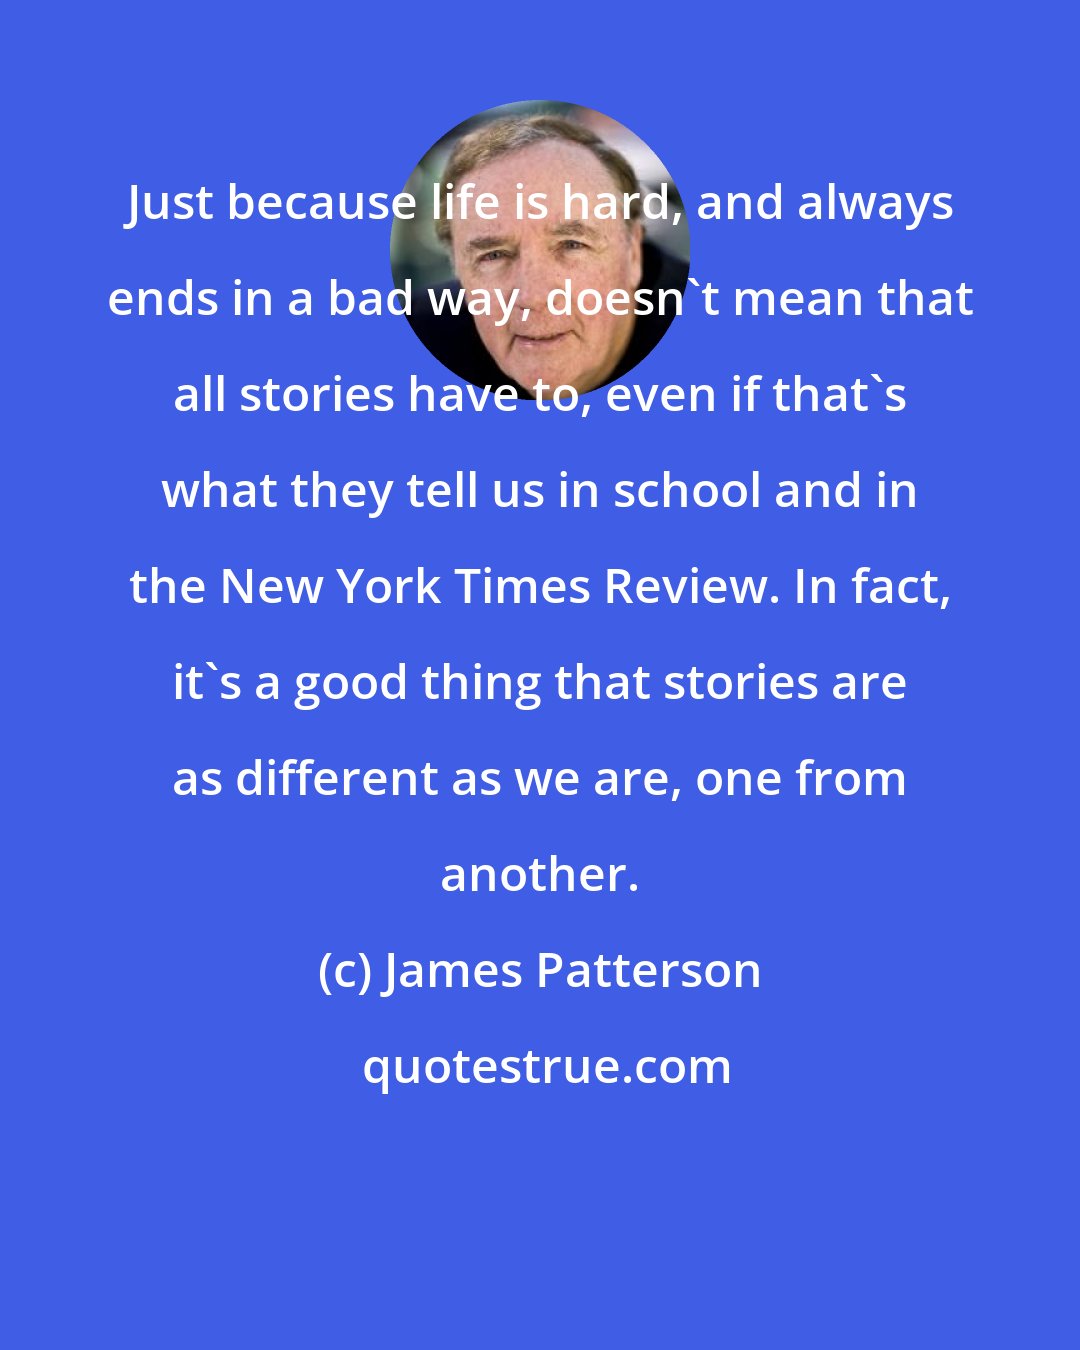 James Patterson: Just because life is hard, and always ends in a bad way, doesn't mean that all stories have to, even if that's what they tell us in school and in the New York Times Review. In fact, it's a good thing that stories are as different as we are, one from another.